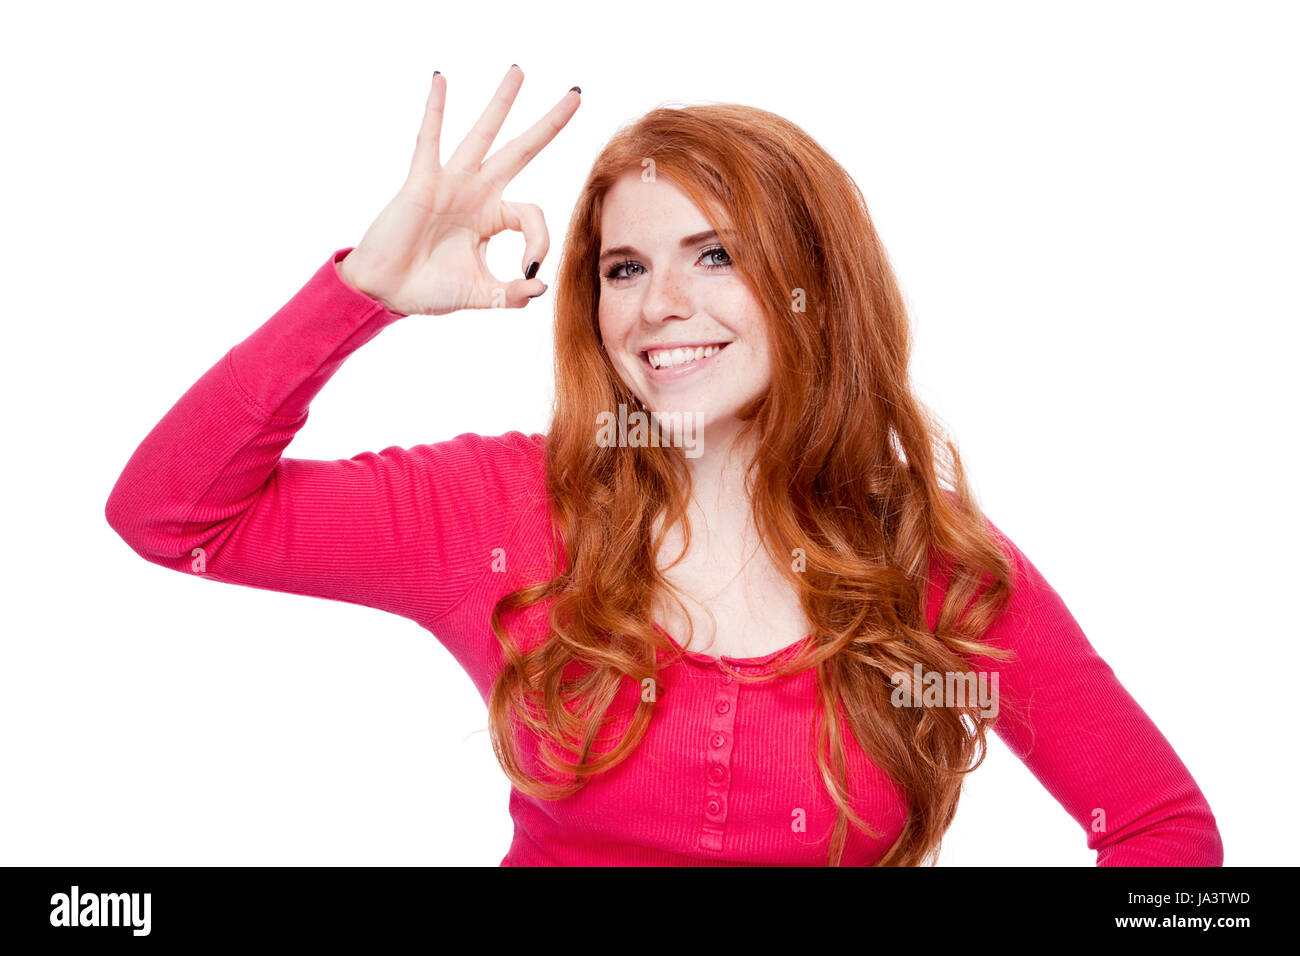 young expressive attractive woman portrait isolated Stock Photo